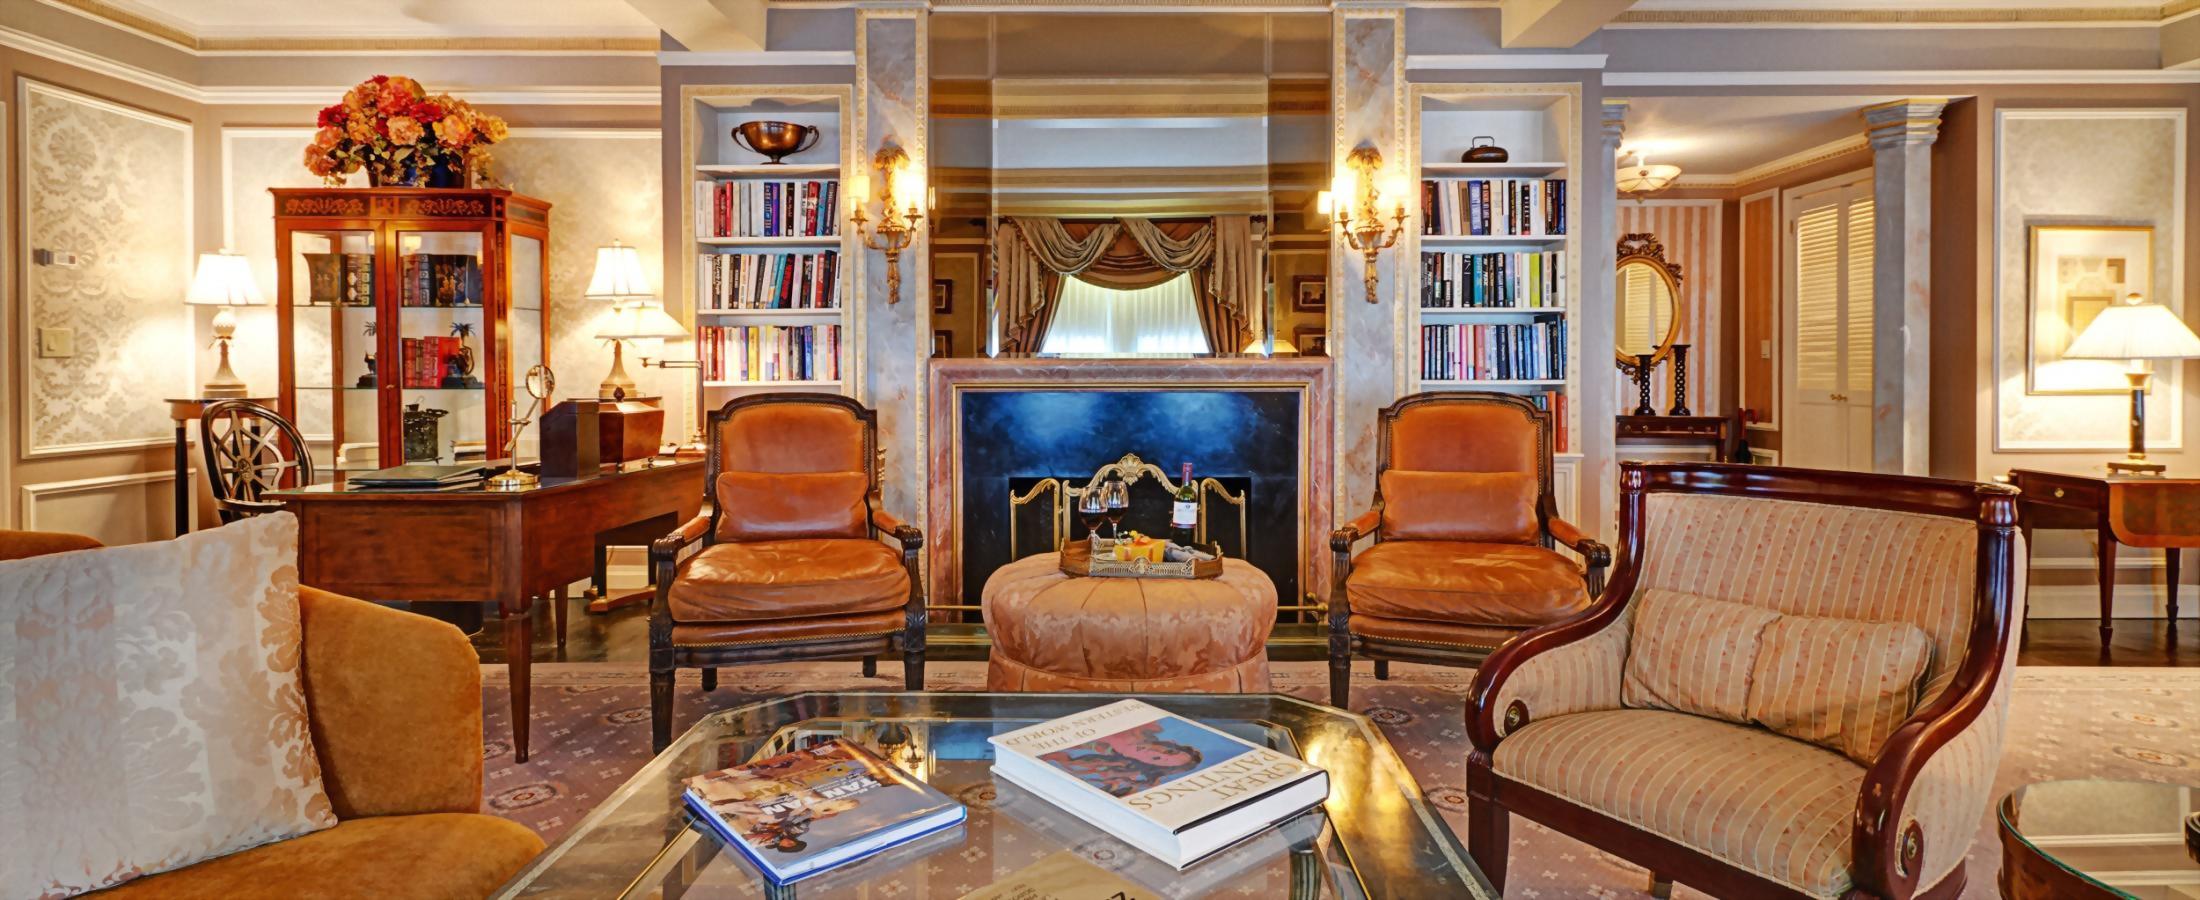 Seating area with faux fireplace in Hotel Elysee Presidential suite